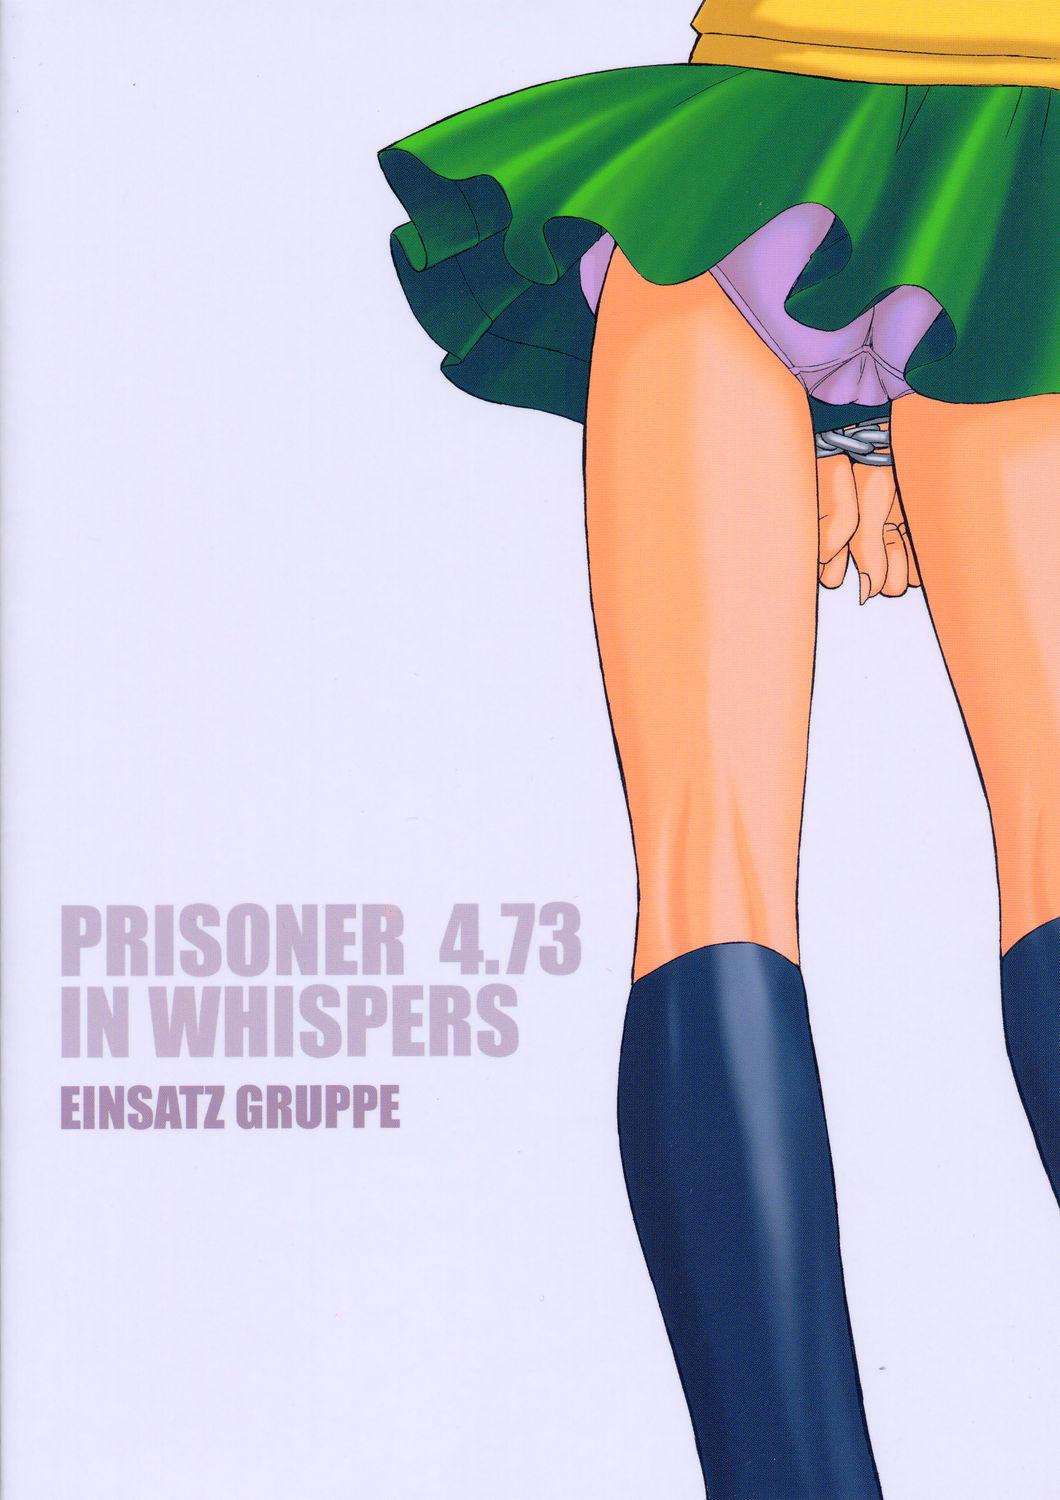 Amateur Free Porn P4.73 PRISONER 4.73 IN WHISPERS - To heart Gays - Page 30